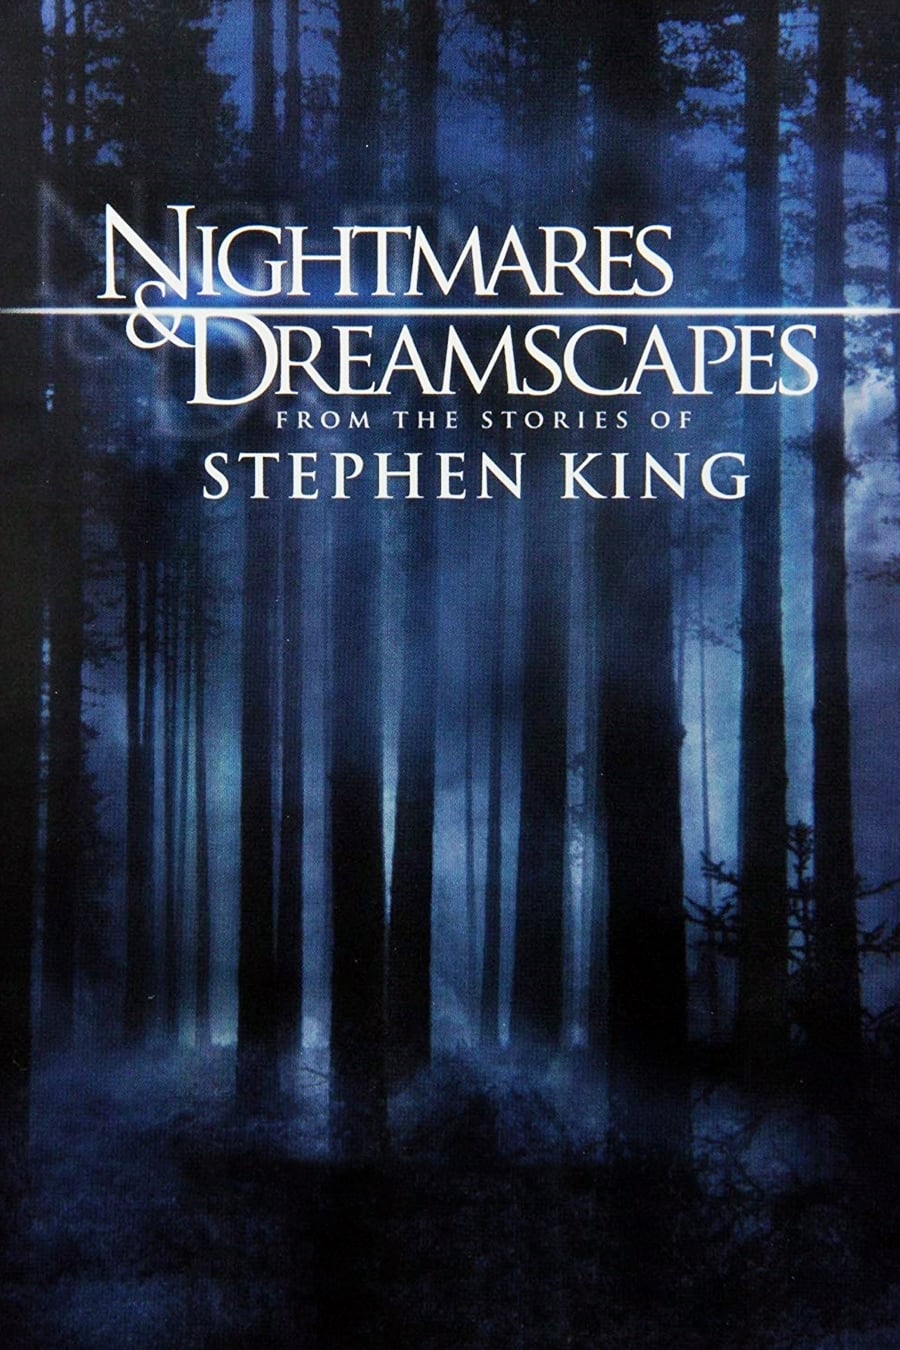 Nightmares & Dreamscapes: From the Stories of Stephen King TV Shows About Based On Short Story